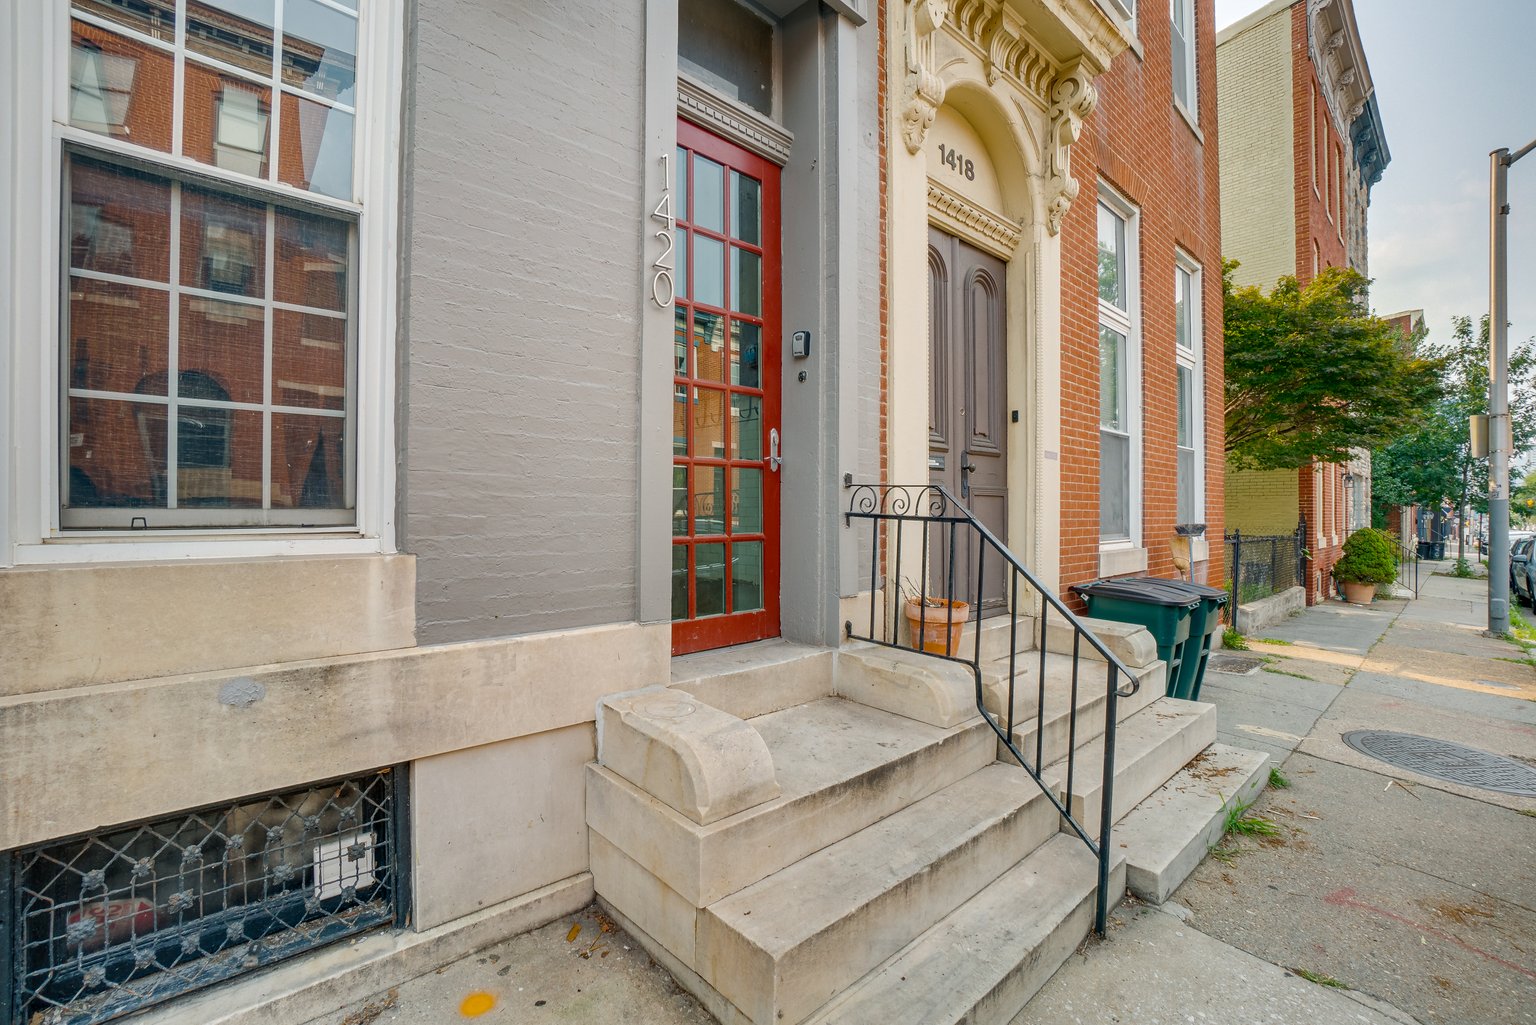 1420 Light St.:  5-Unit Multifamily Apartment Property in Popular Federal Hill.